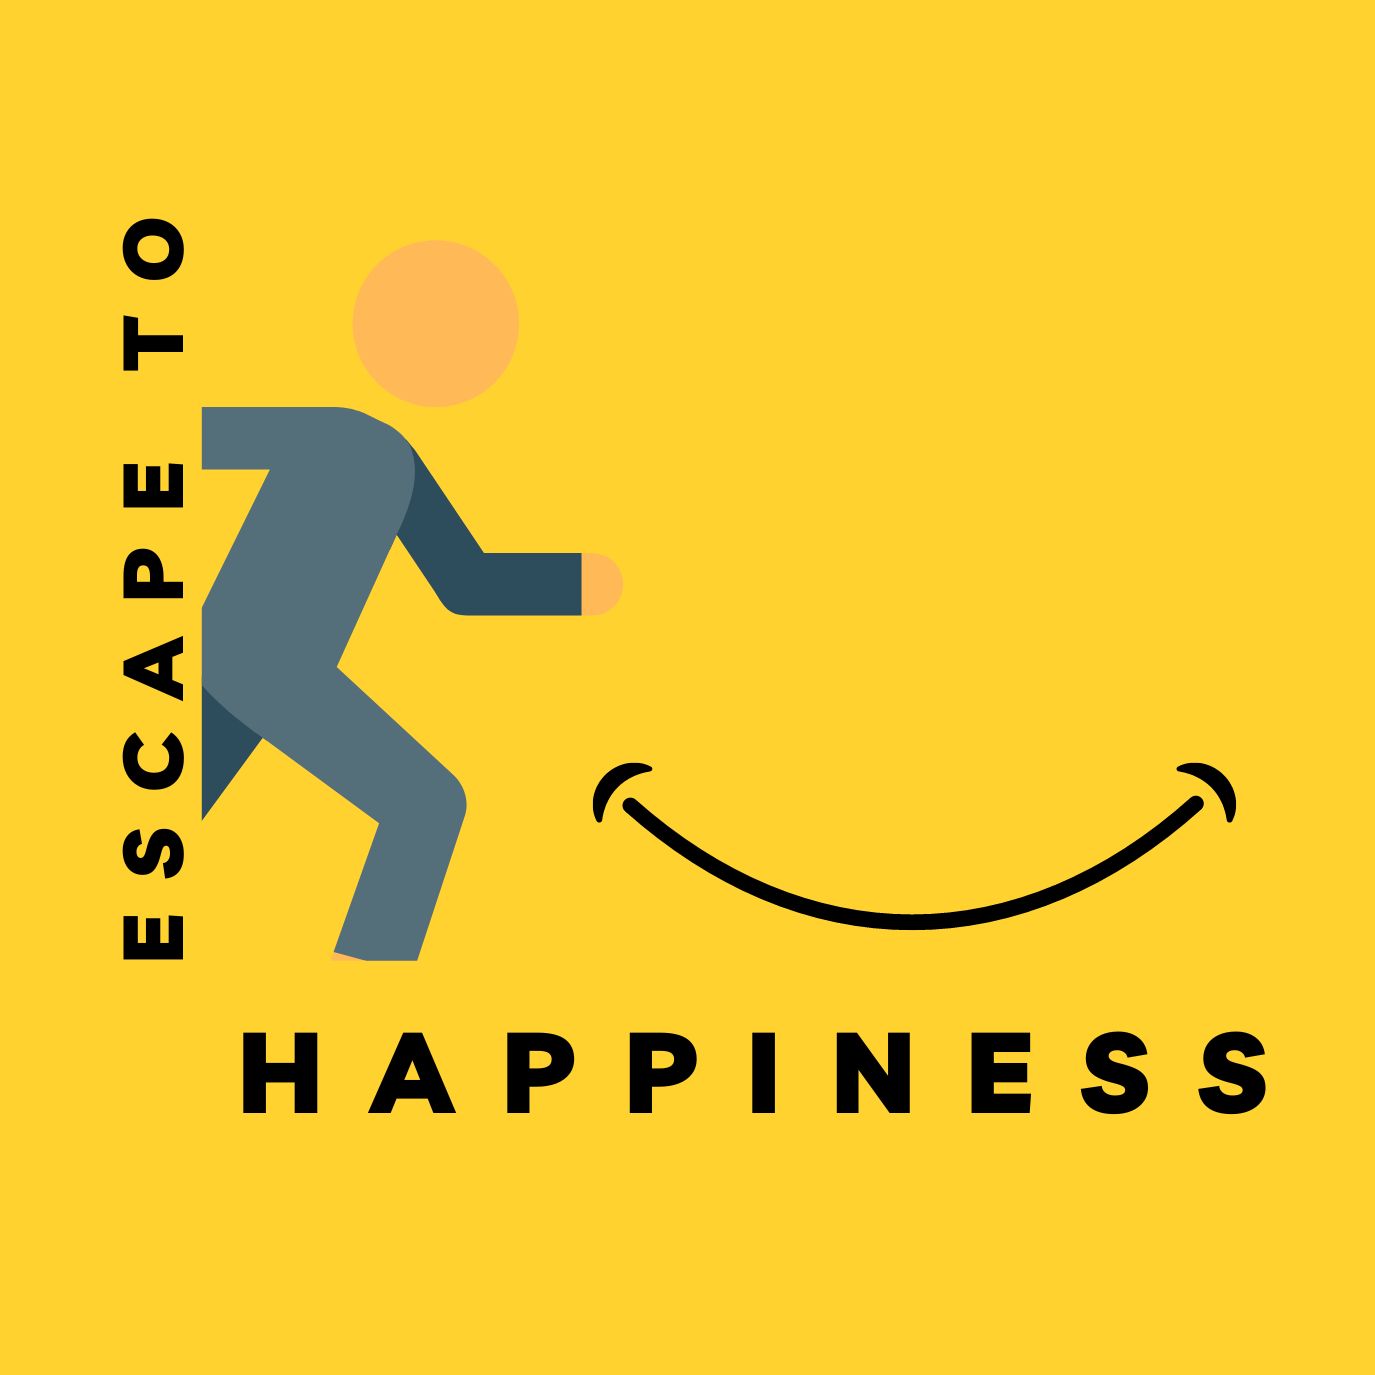 Escape to Happiness